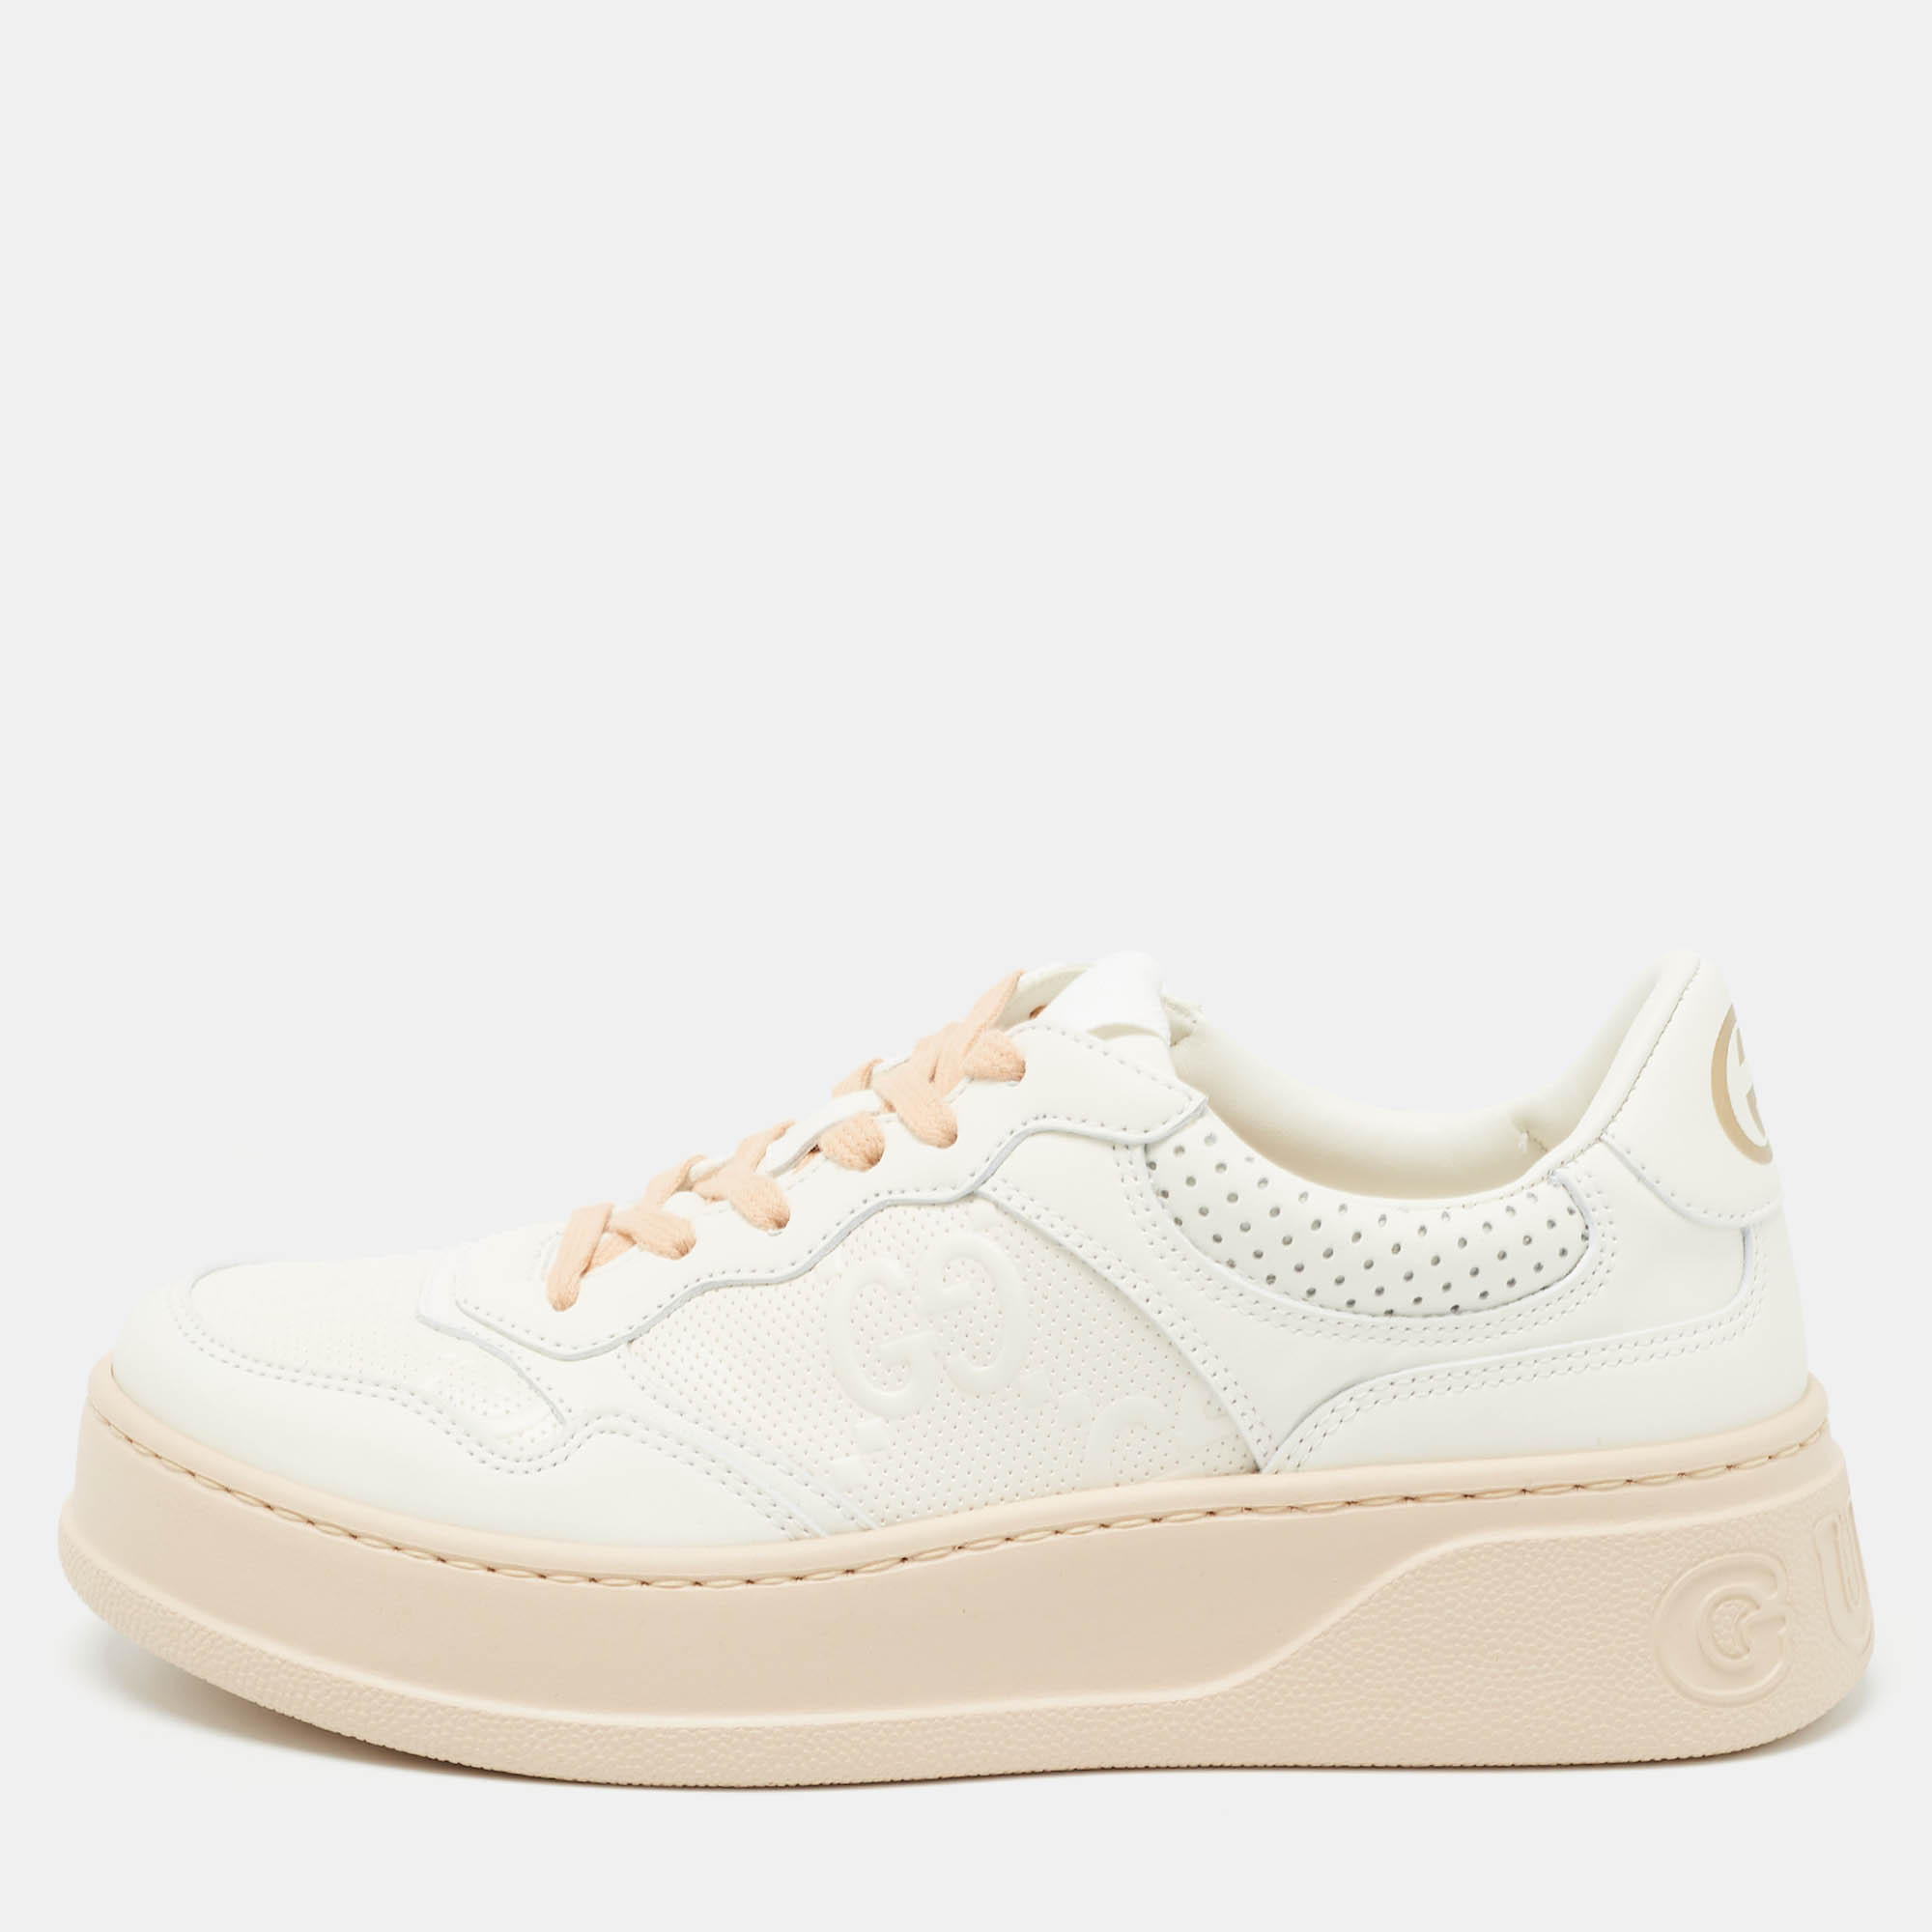 Give your outfit a chic update with this pair of Gucci white sneakers. The creation is sewn perfectly to help you make a statement in them for a long time.